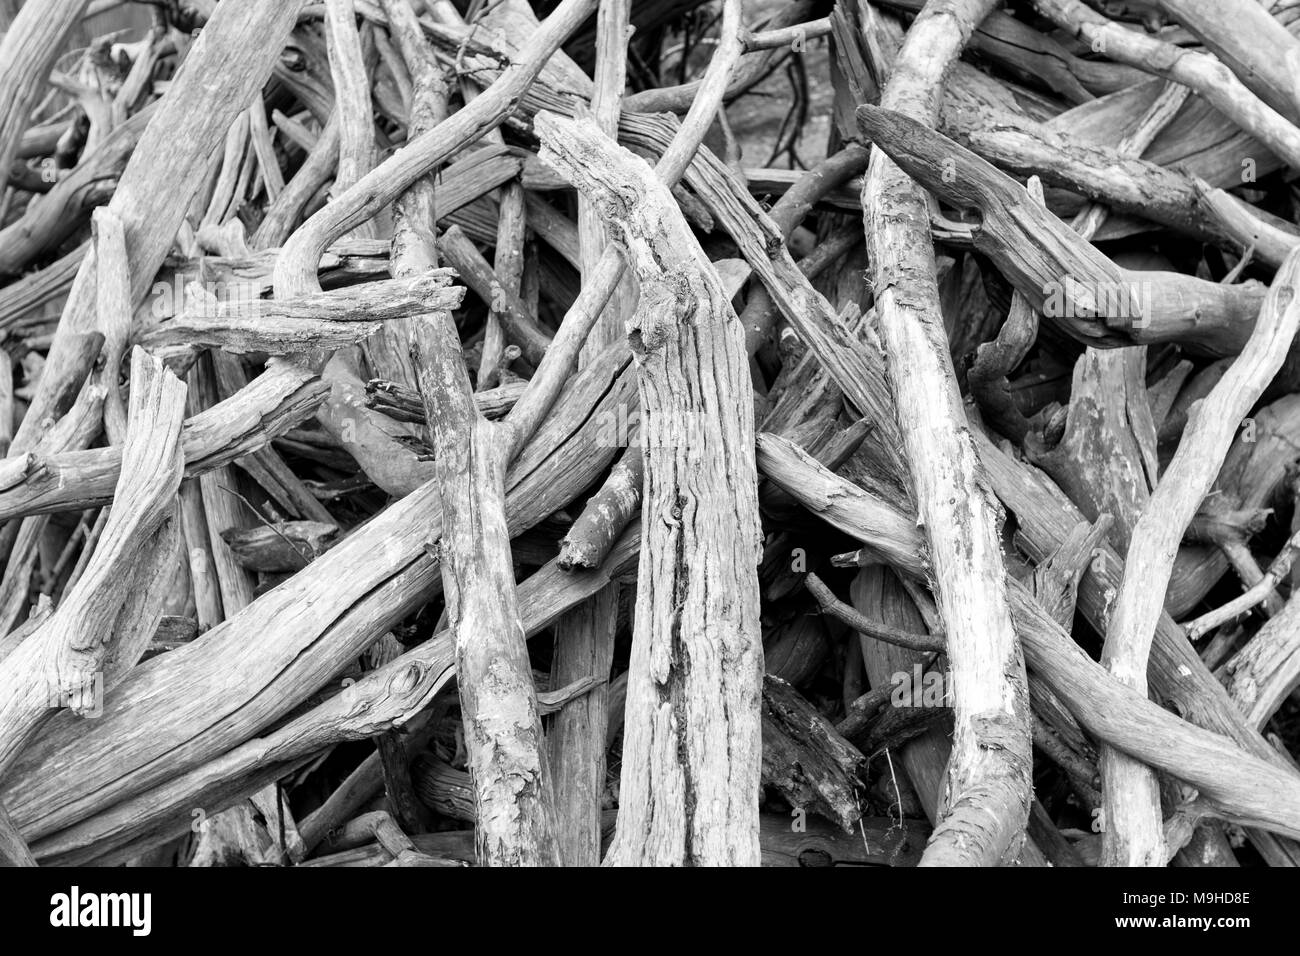 Black and white shot of old, dead and dry sweet chestnut tree branches piled on the ground. Stock Photo